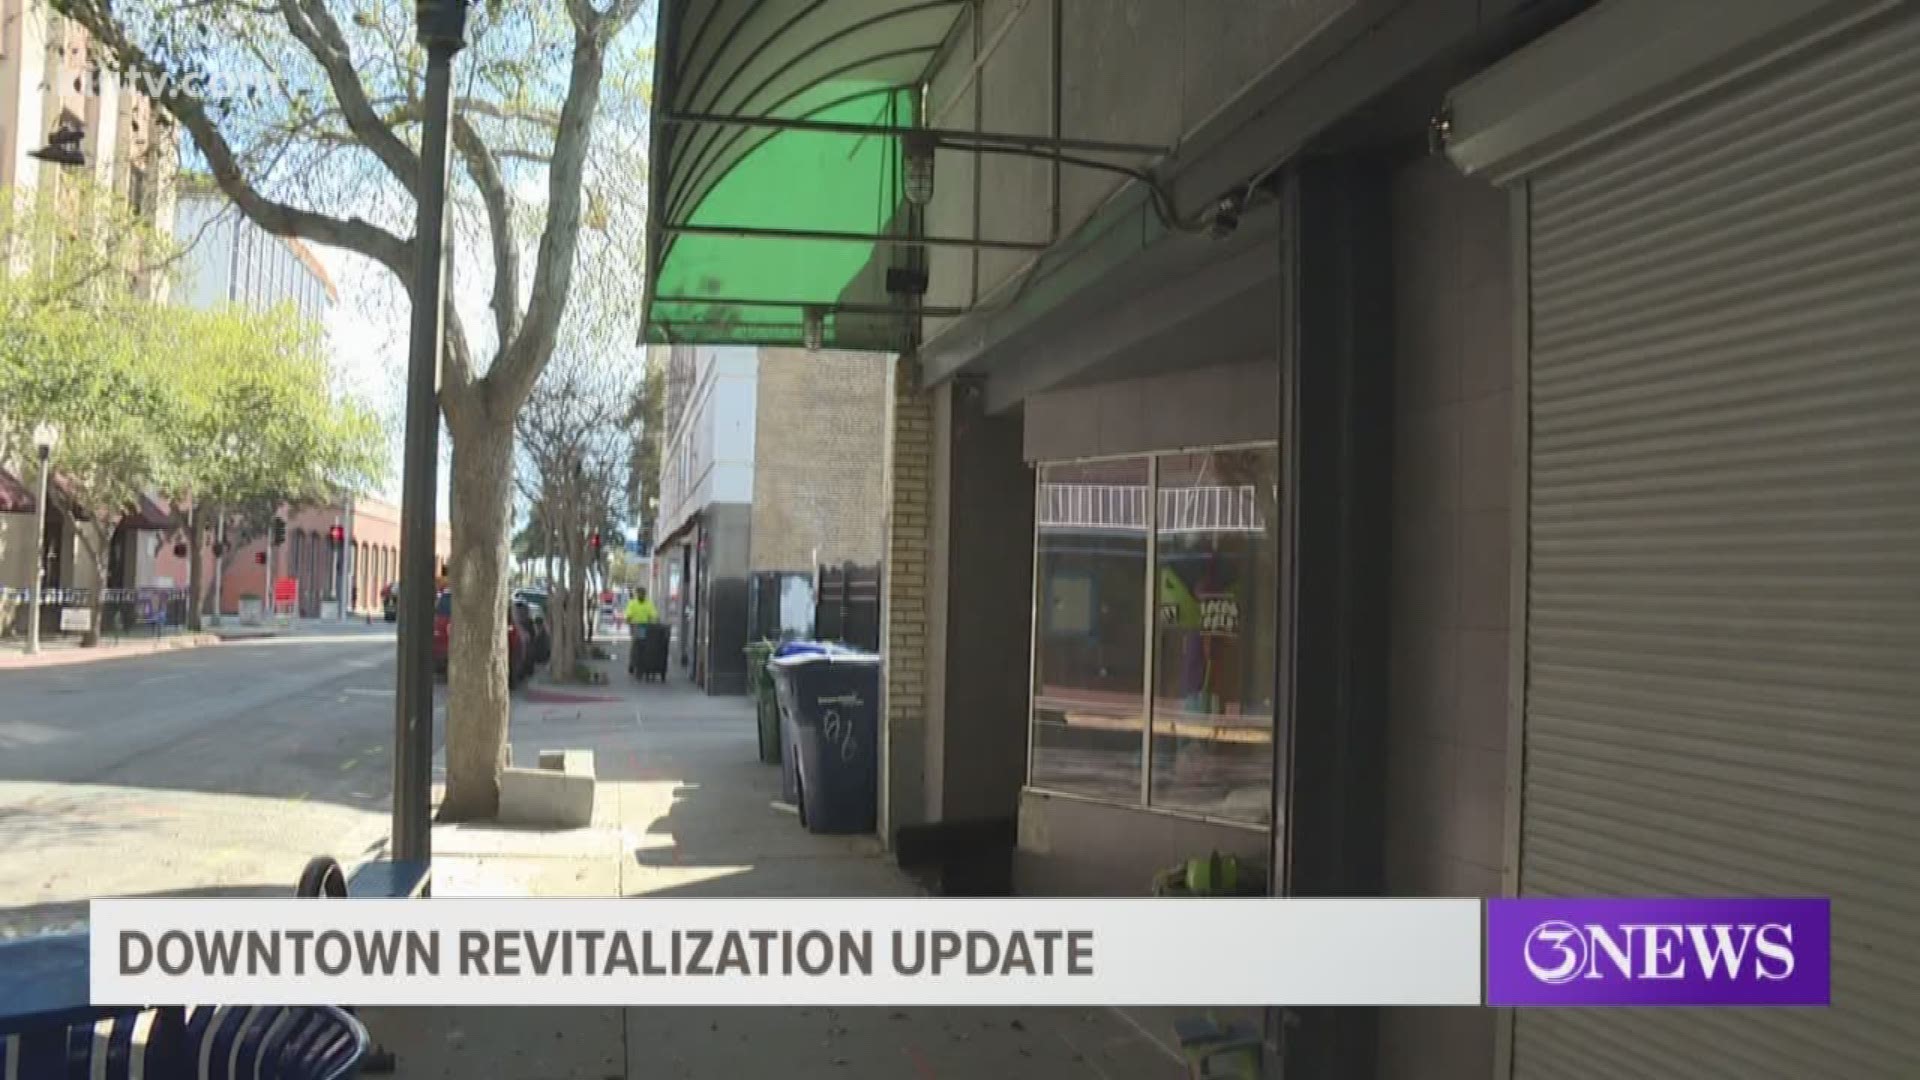 Think the Downtown area needs more improvement? The City agrees! Those in charge of managing the reinvestment zone agreed to extend funding for another 6 months.